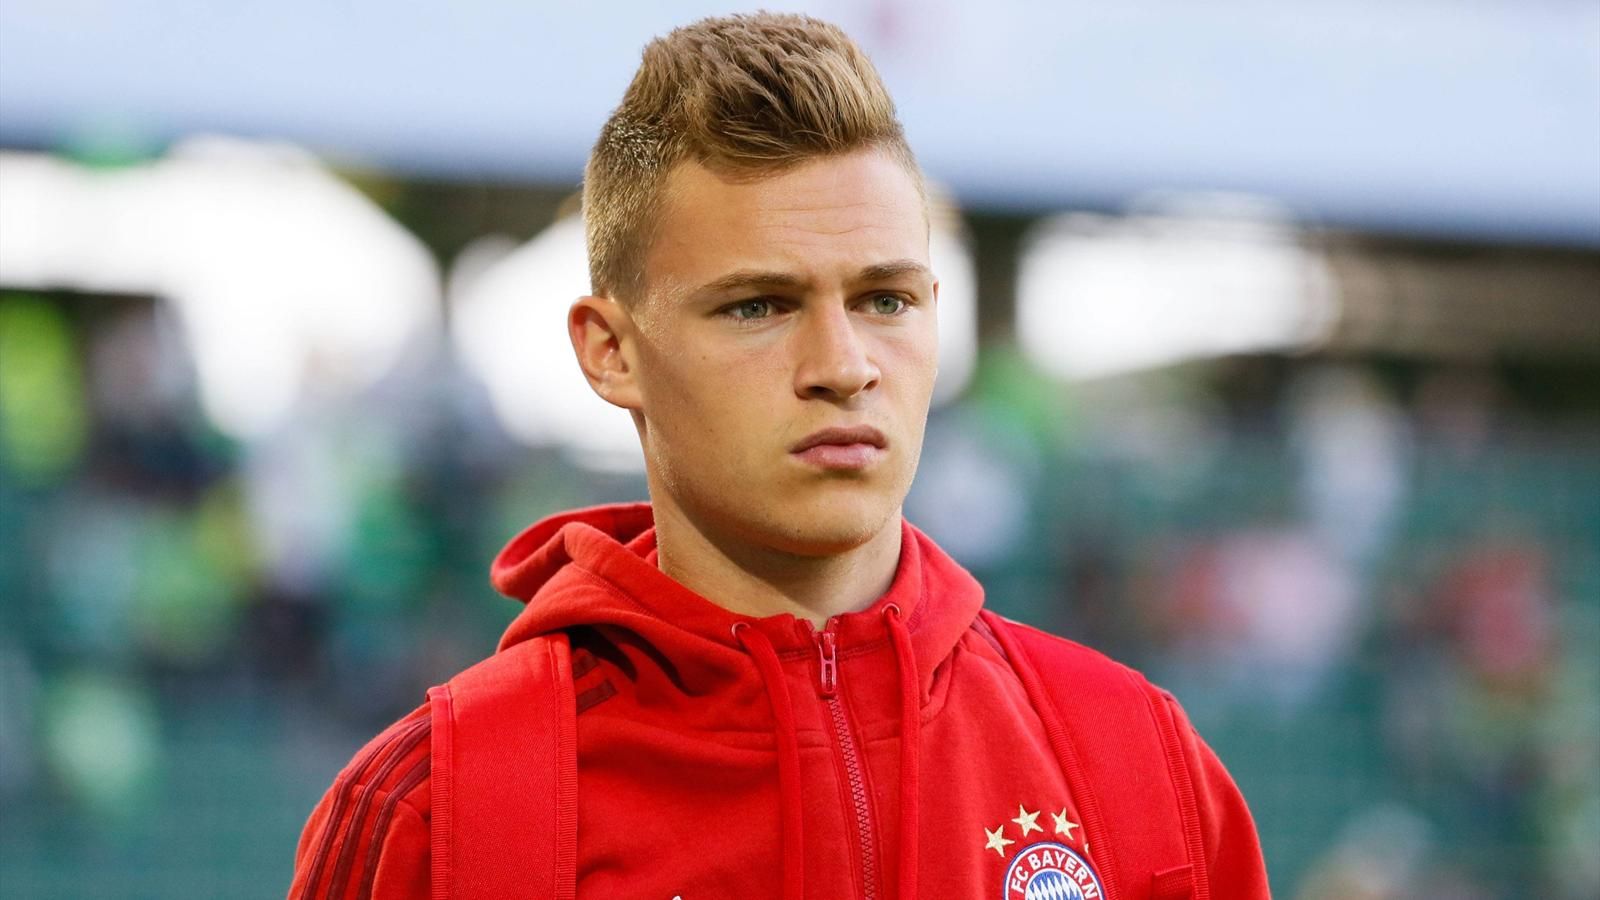 Joshua Kimmich | The Bayern Munich Ace Has the World at His Feet